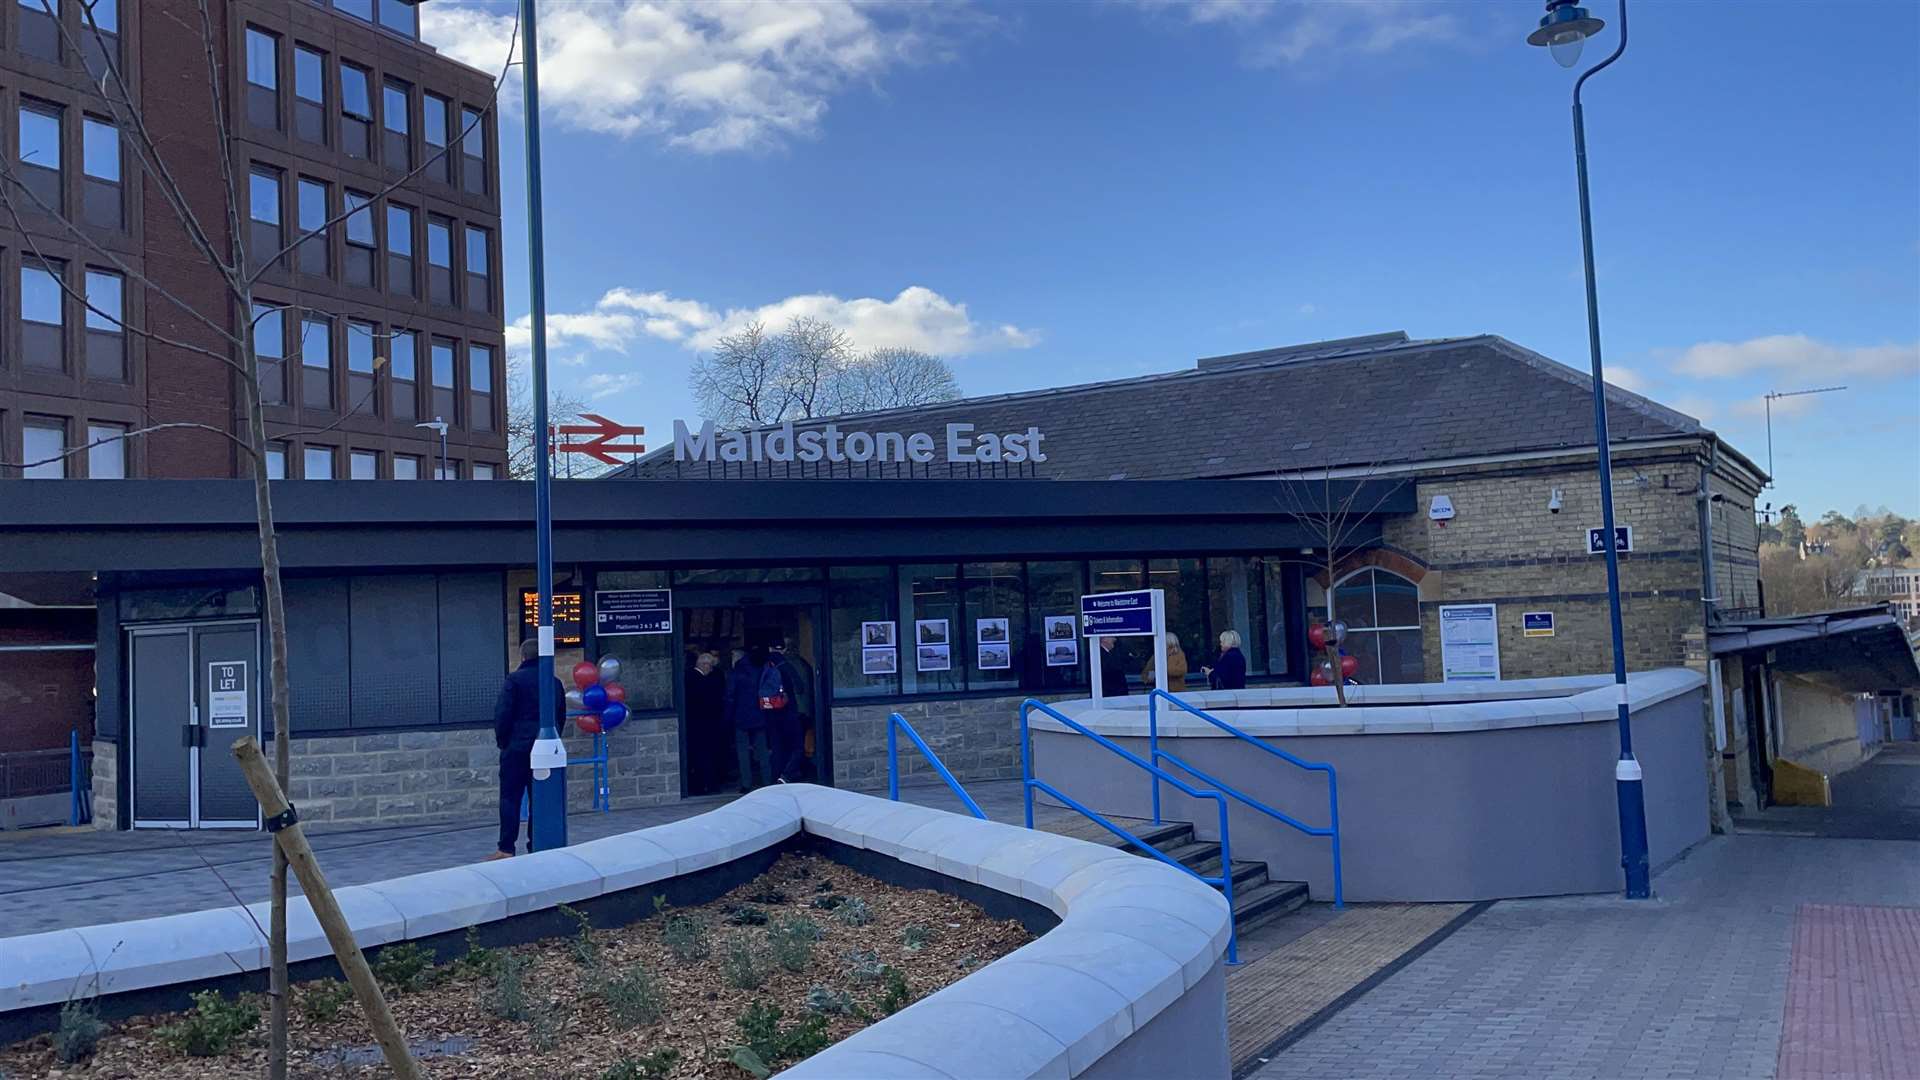 British Transport Police are at Maidstone East railway station after reports of a person trespassing